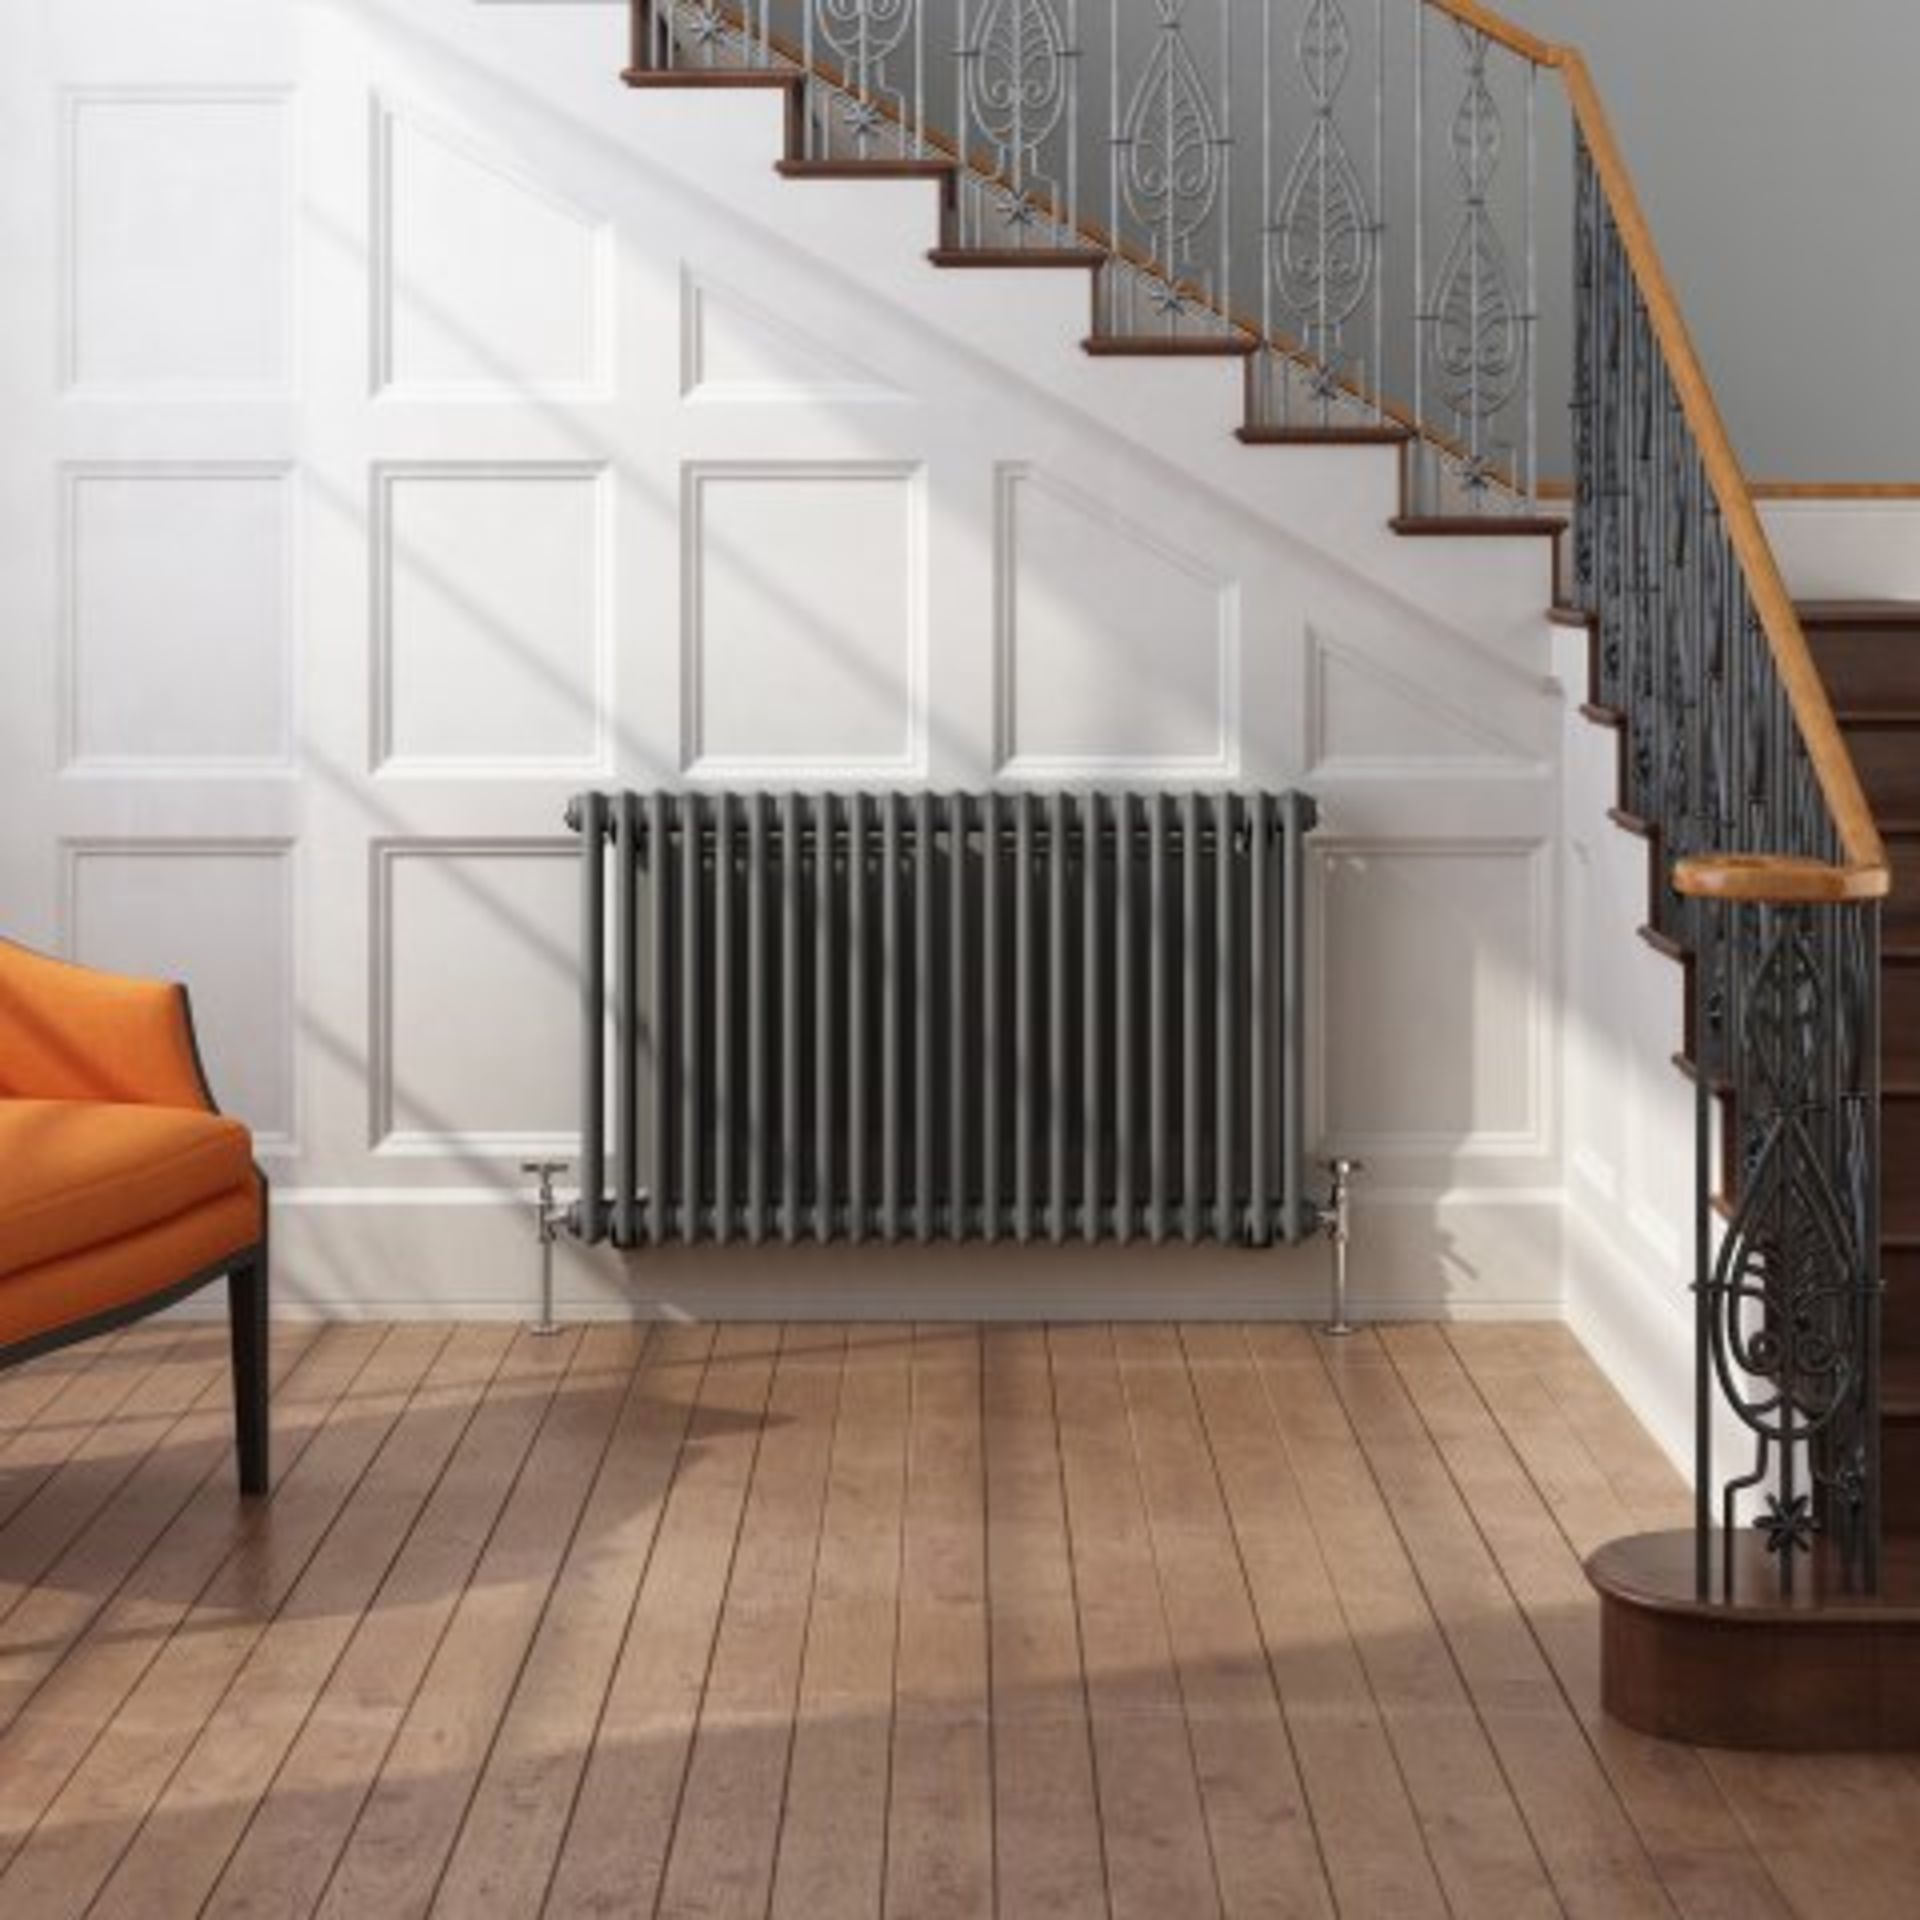 (O97) 600x1008 Anthracite Double Panel Horizontal Colosseum Traditional Radiator. RRP £524.99. - Image 2 of 5